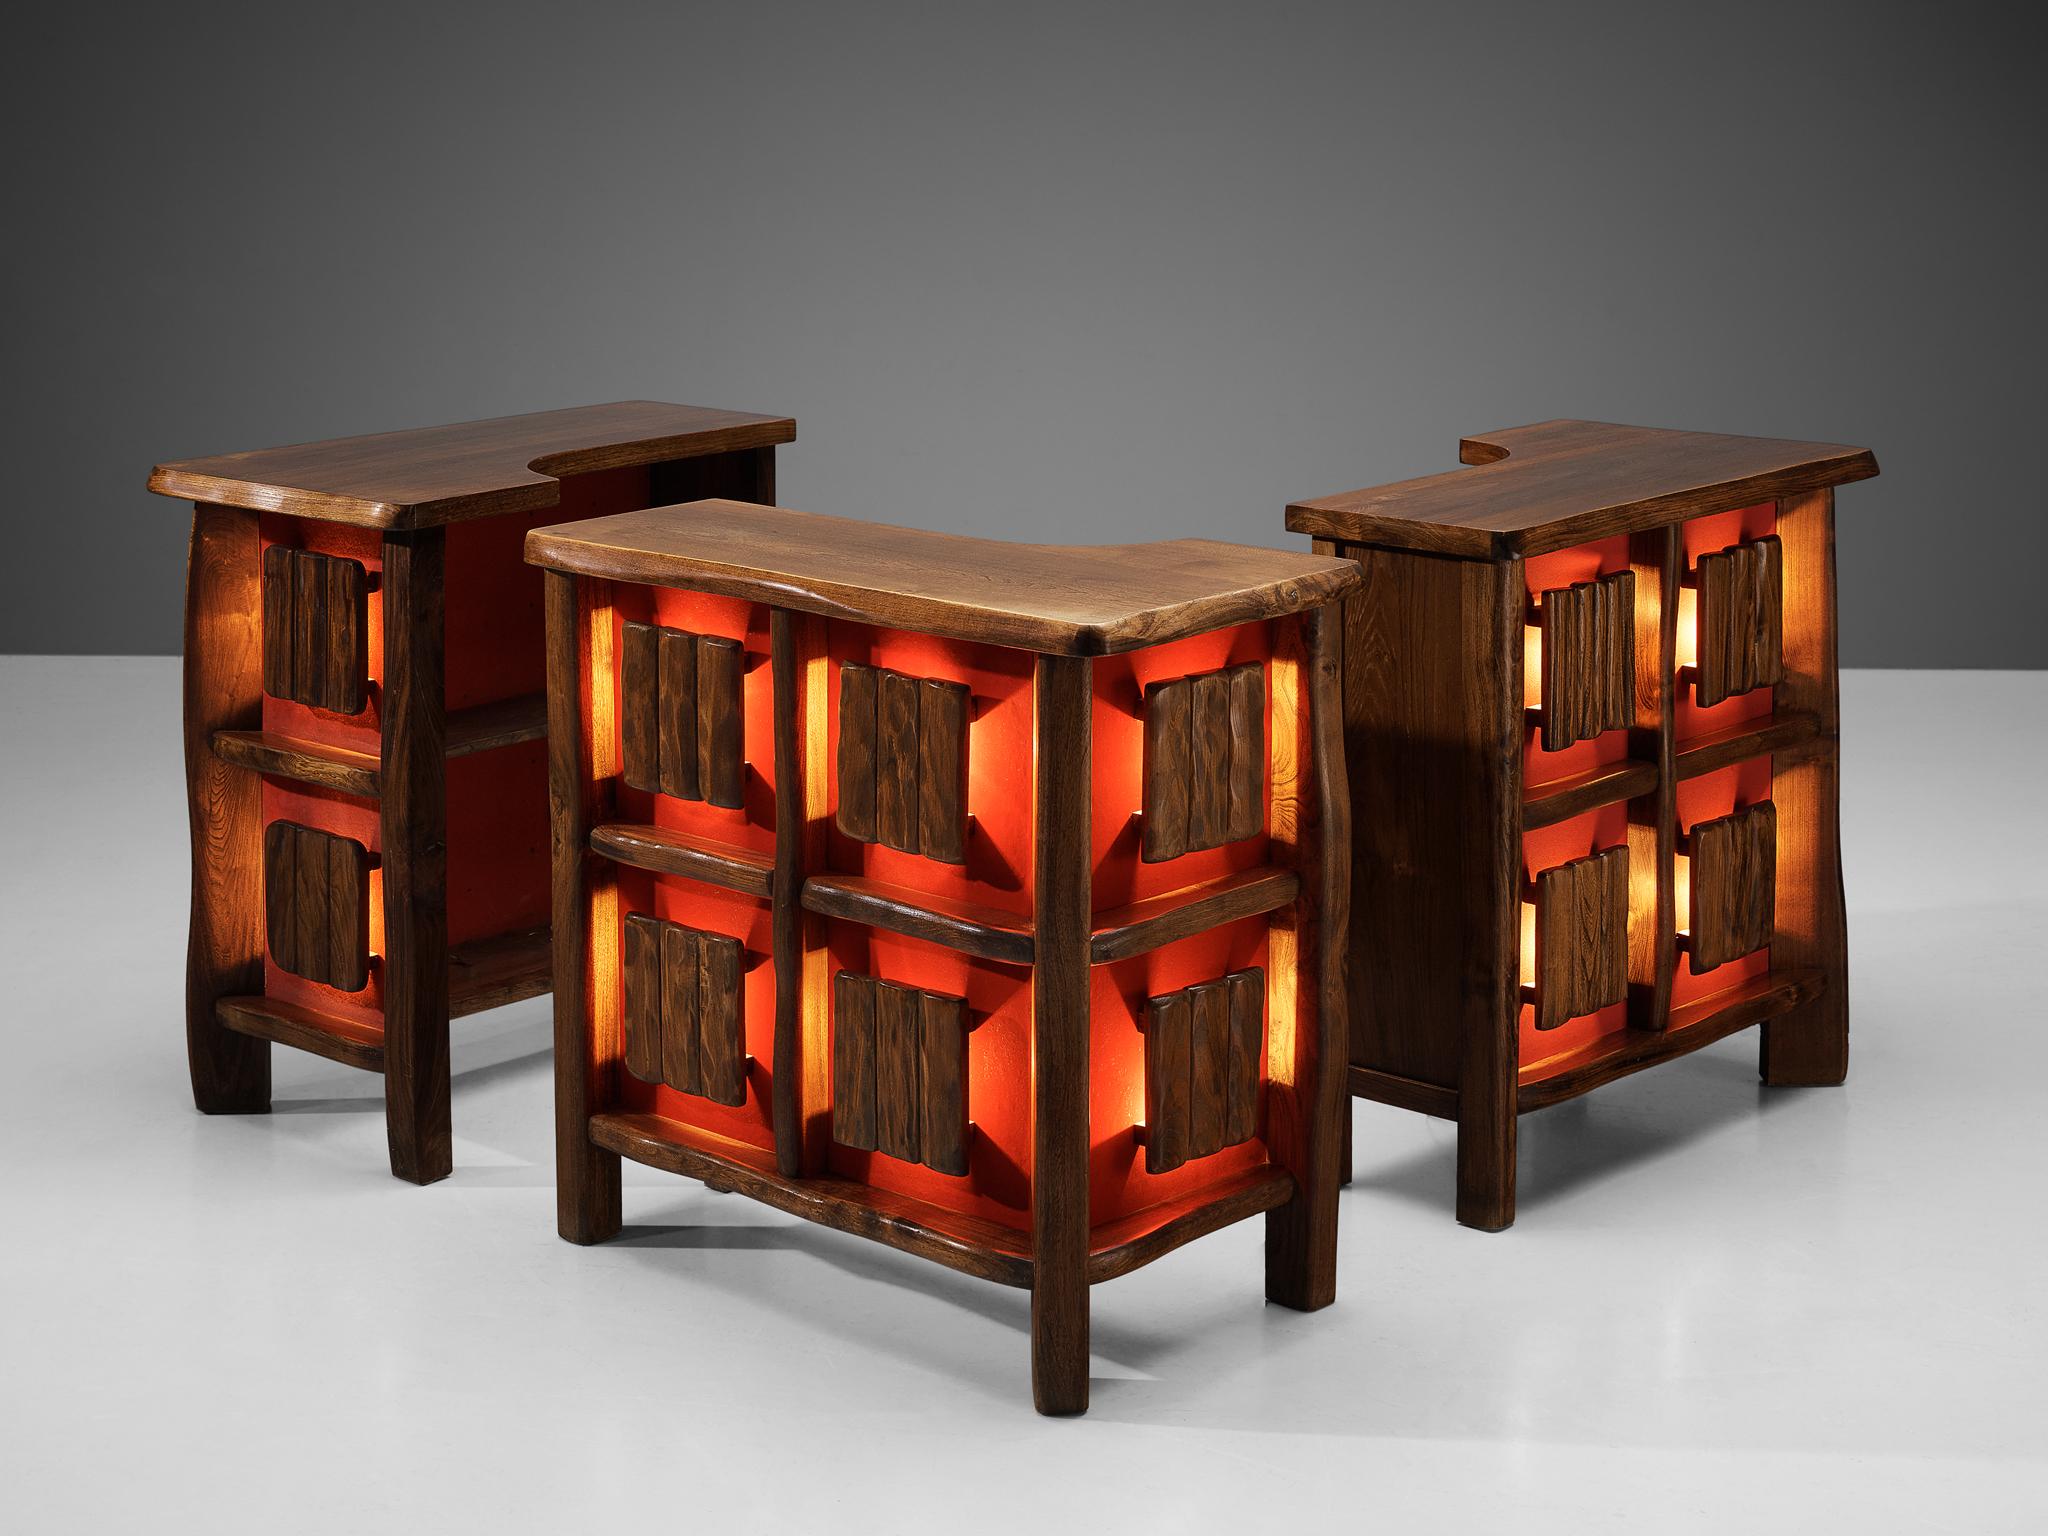 Modular bar cabinets, elm, velvet, France, 1950s.

These multifunctional items is from French origin and embraces naturalistic forms combined with bold accents. The elmwood material has an incredibly soft, visual texture that shows nice wooden